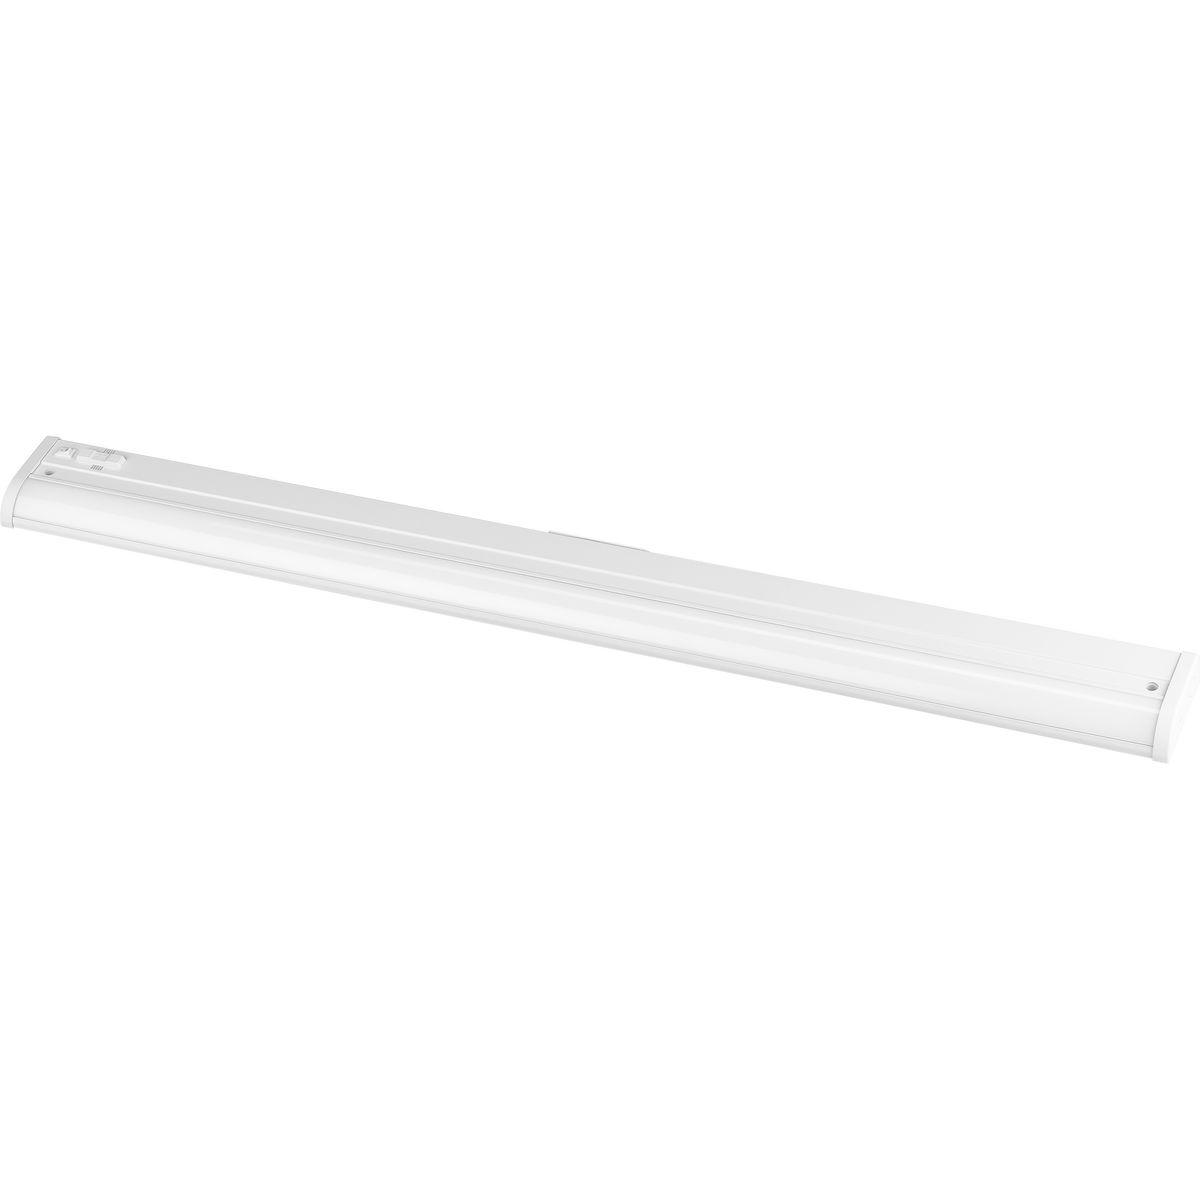 Hubbell P700028-028-CS Combine elegant design with energy-efficient LED light in the Hide-A-Lite Collection 1-Light 36-Inch Satin White Modern LED Linear Undercabinet Light. The fixture's frame is coated in a crisp satin white finish. An access plate and quick connect wire conn